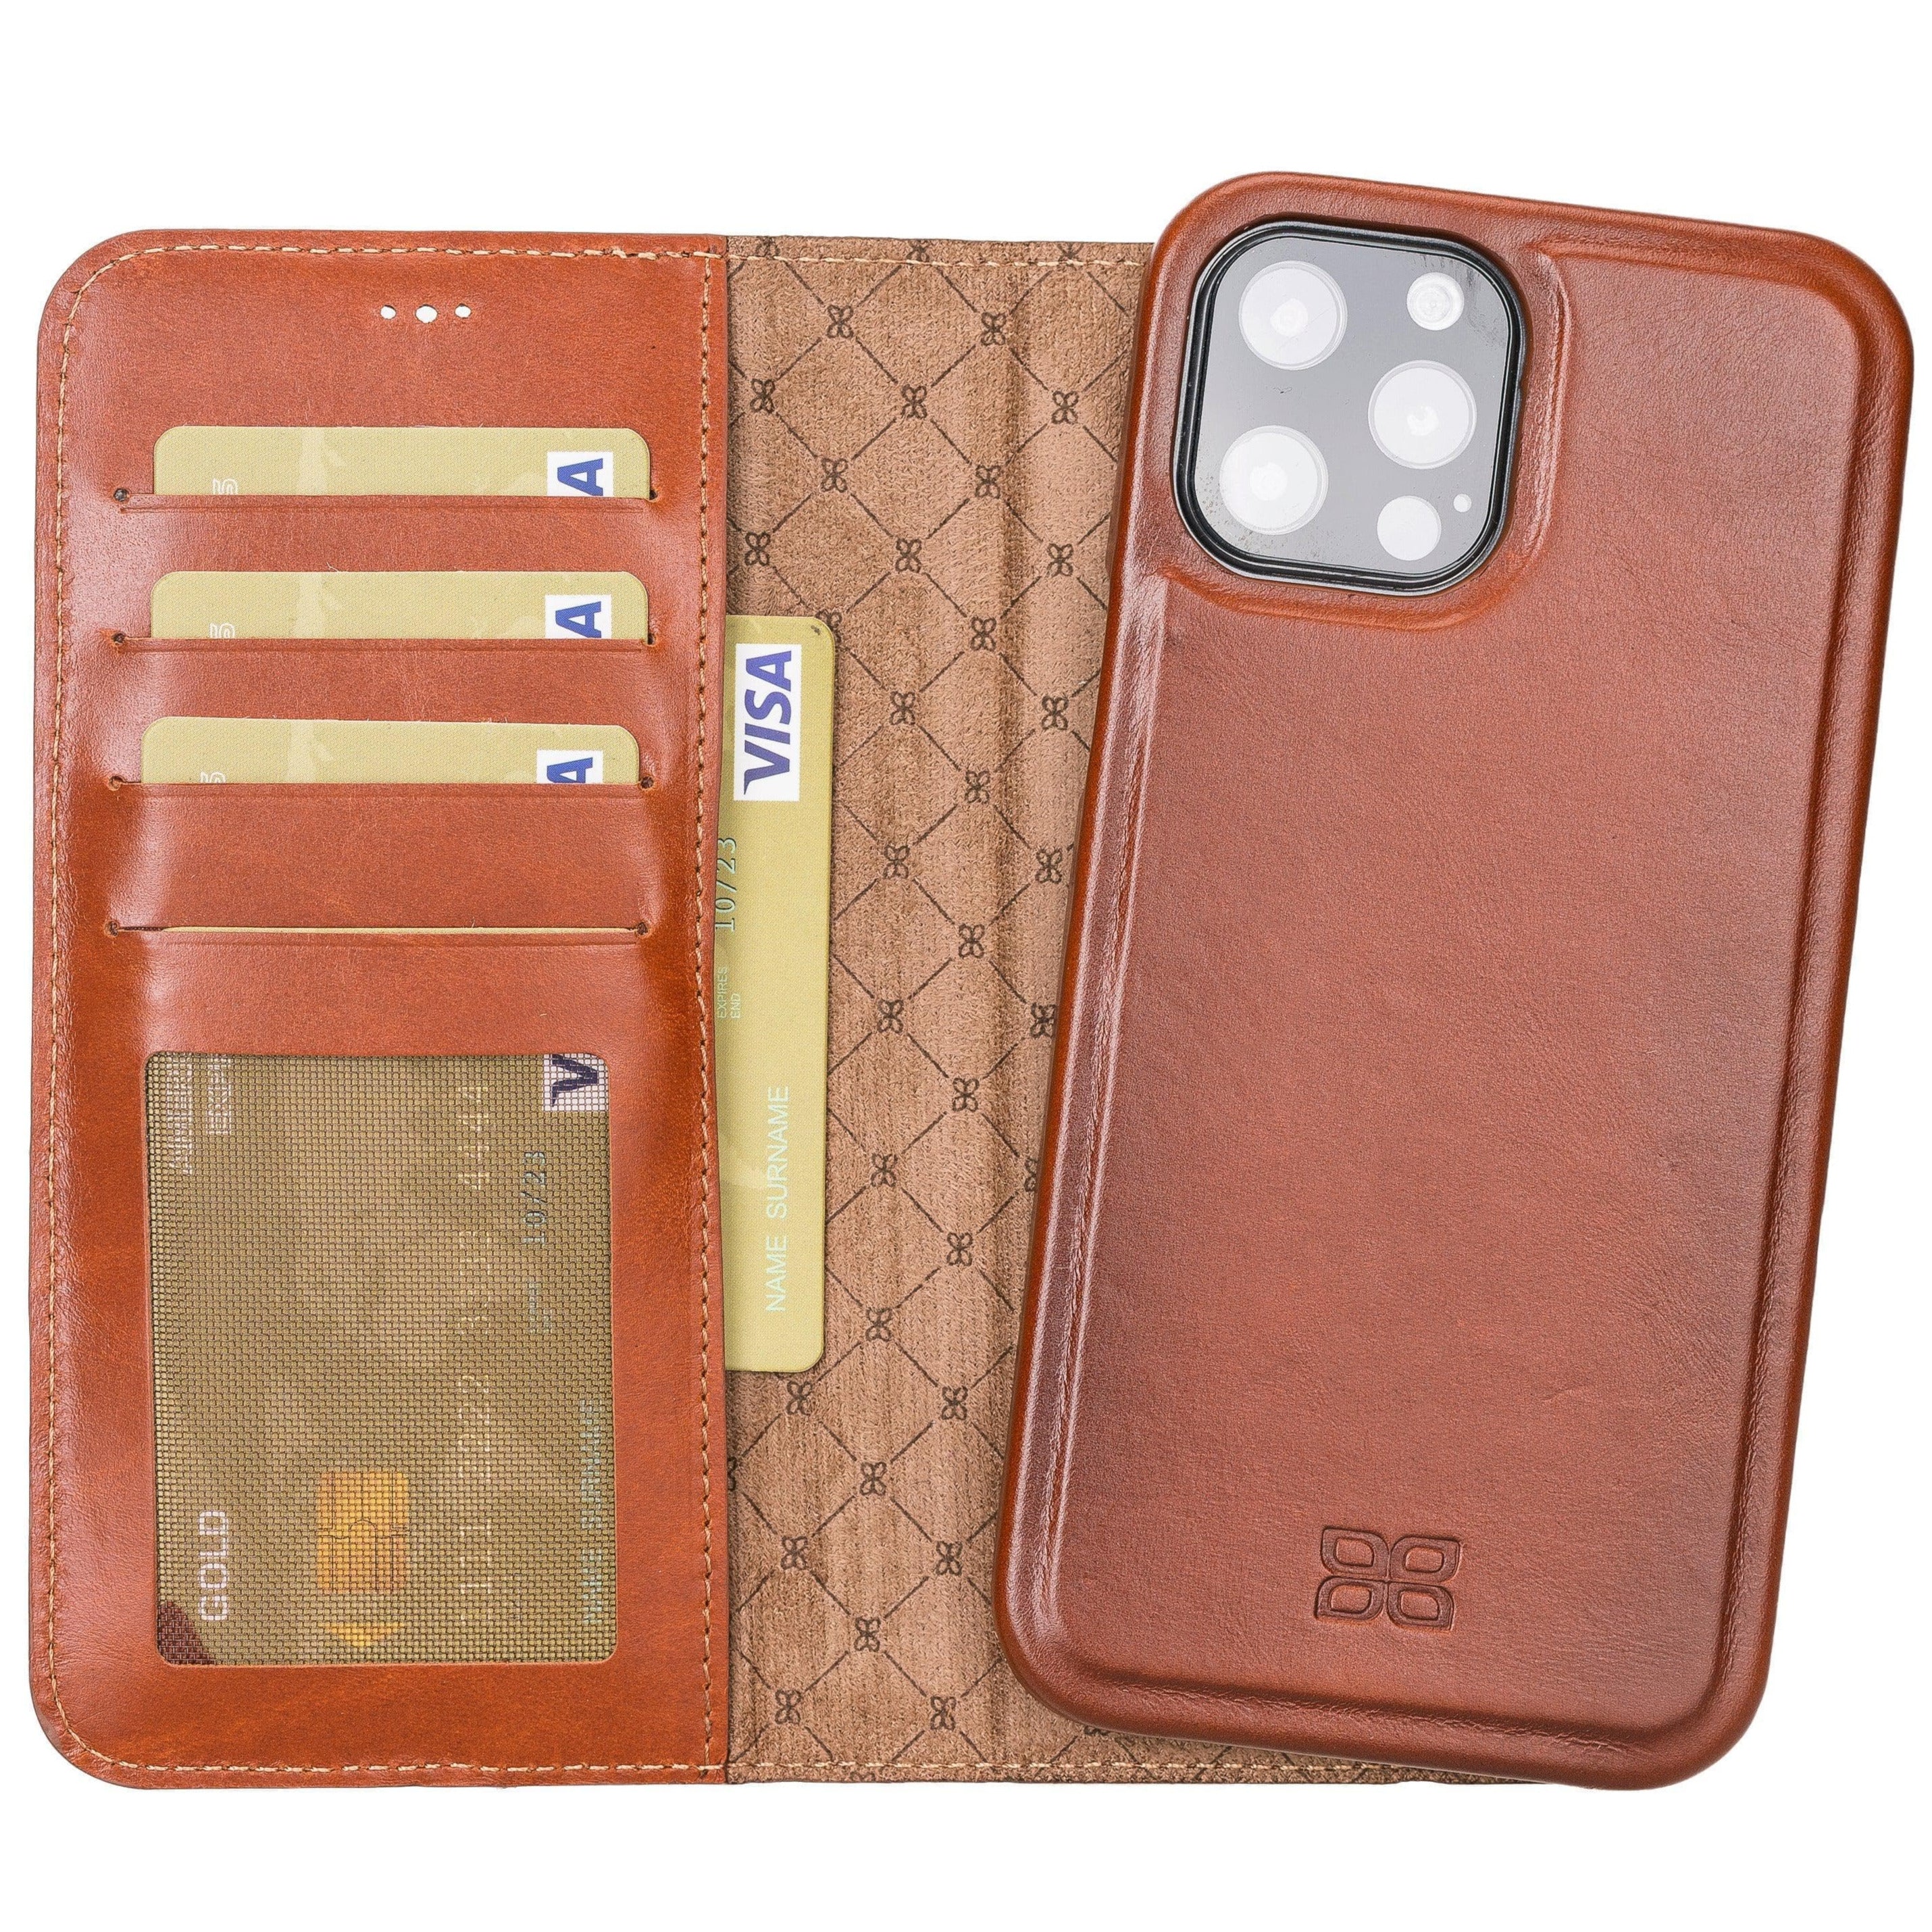 F360 Magnetic Detachable Leather Wallet Cases for Apple iPhone 12 Series iPhone 12 Promax / Tan Bouletta LTD